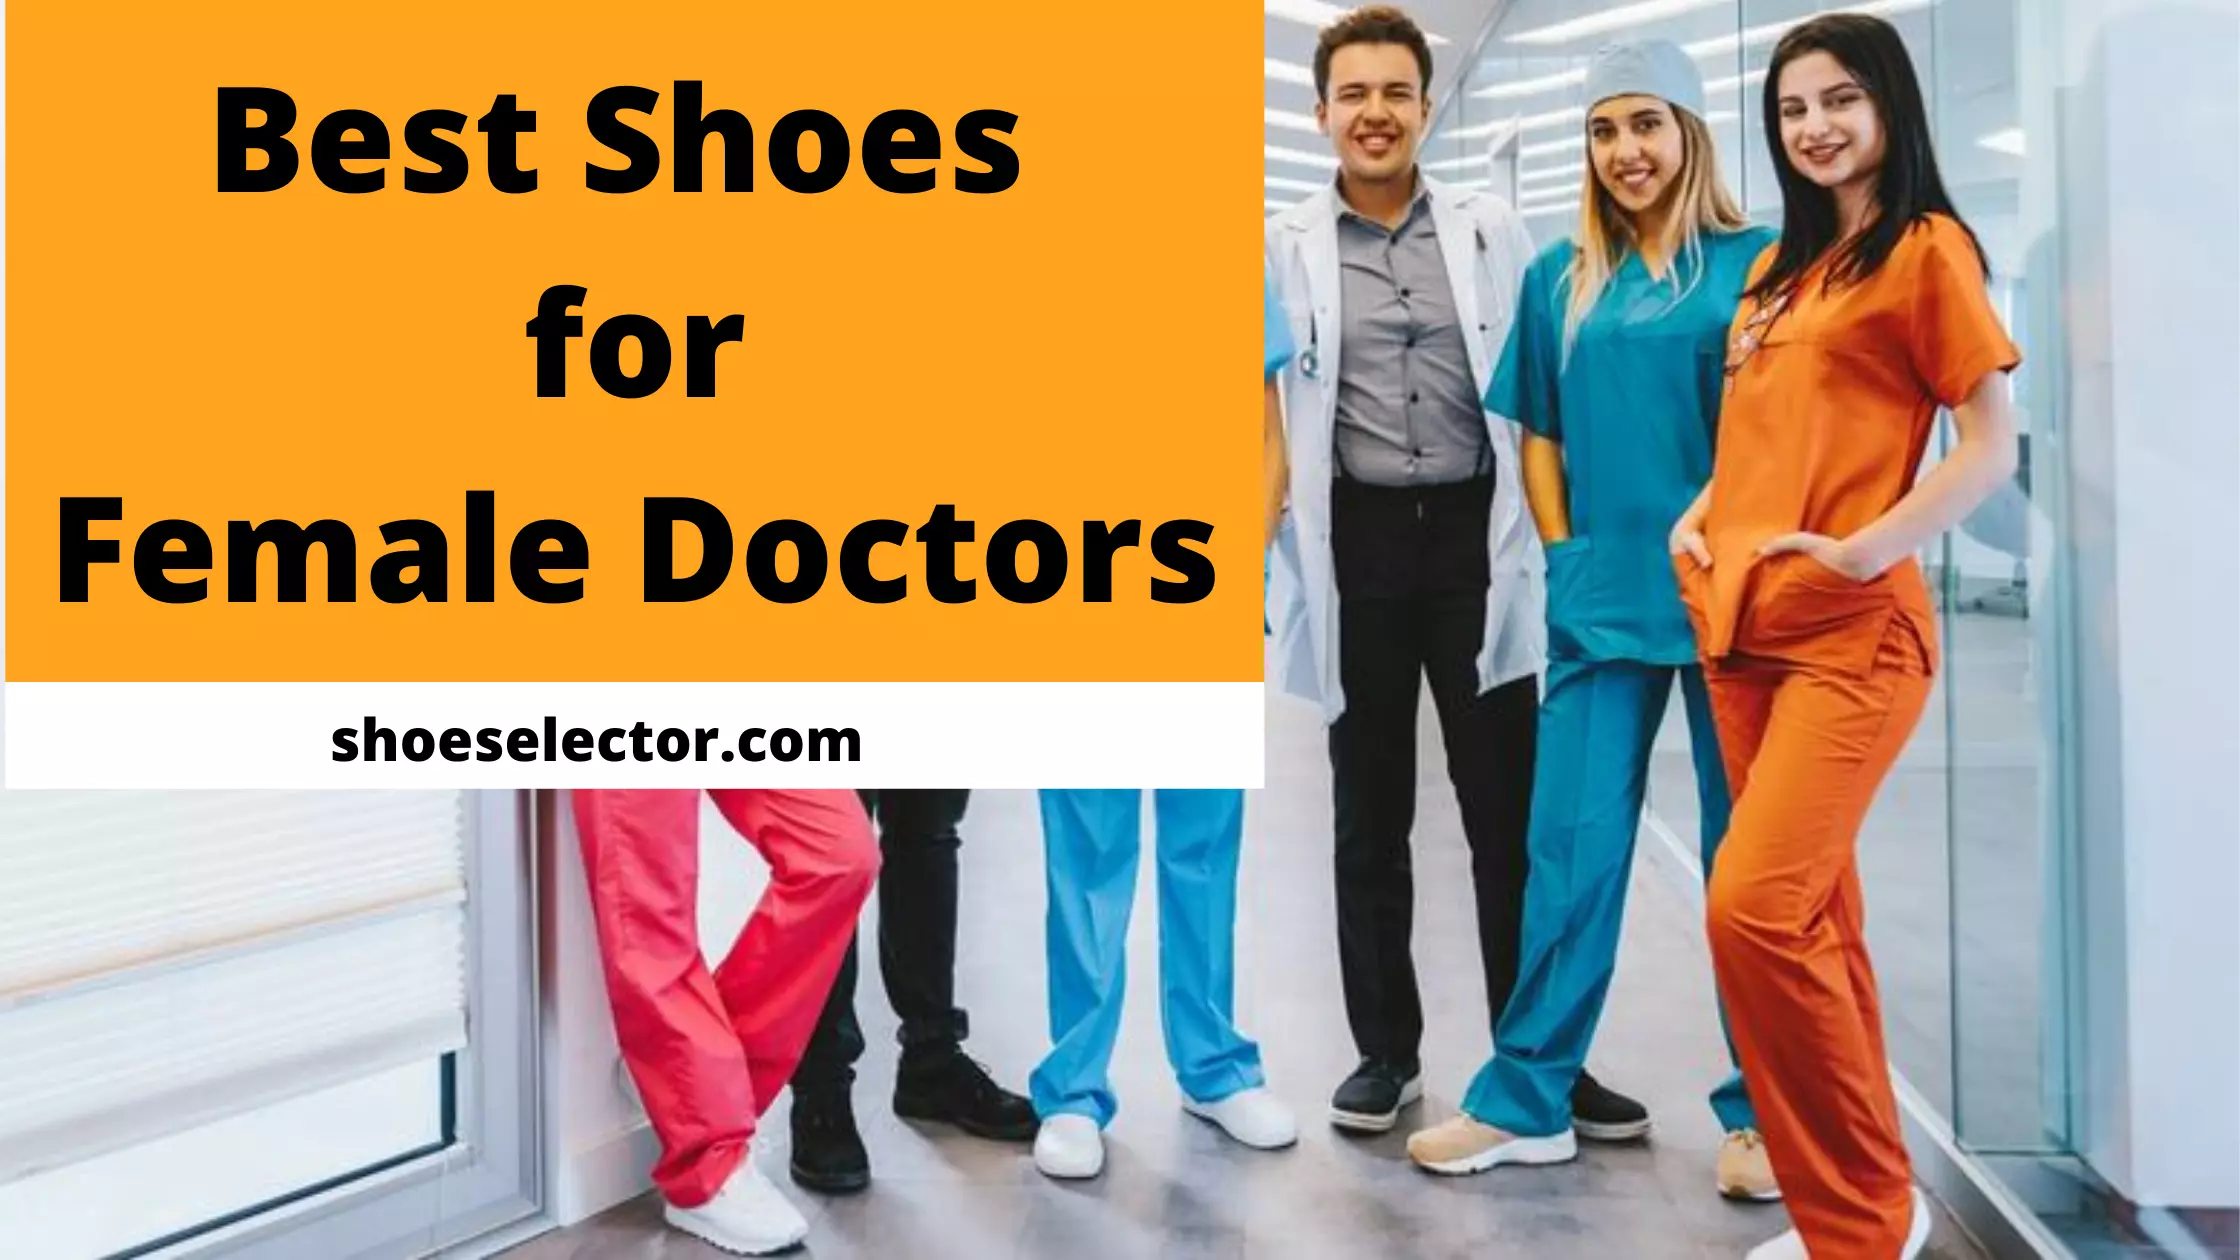 Best Shoes for Female Doctors & Medical Professionals